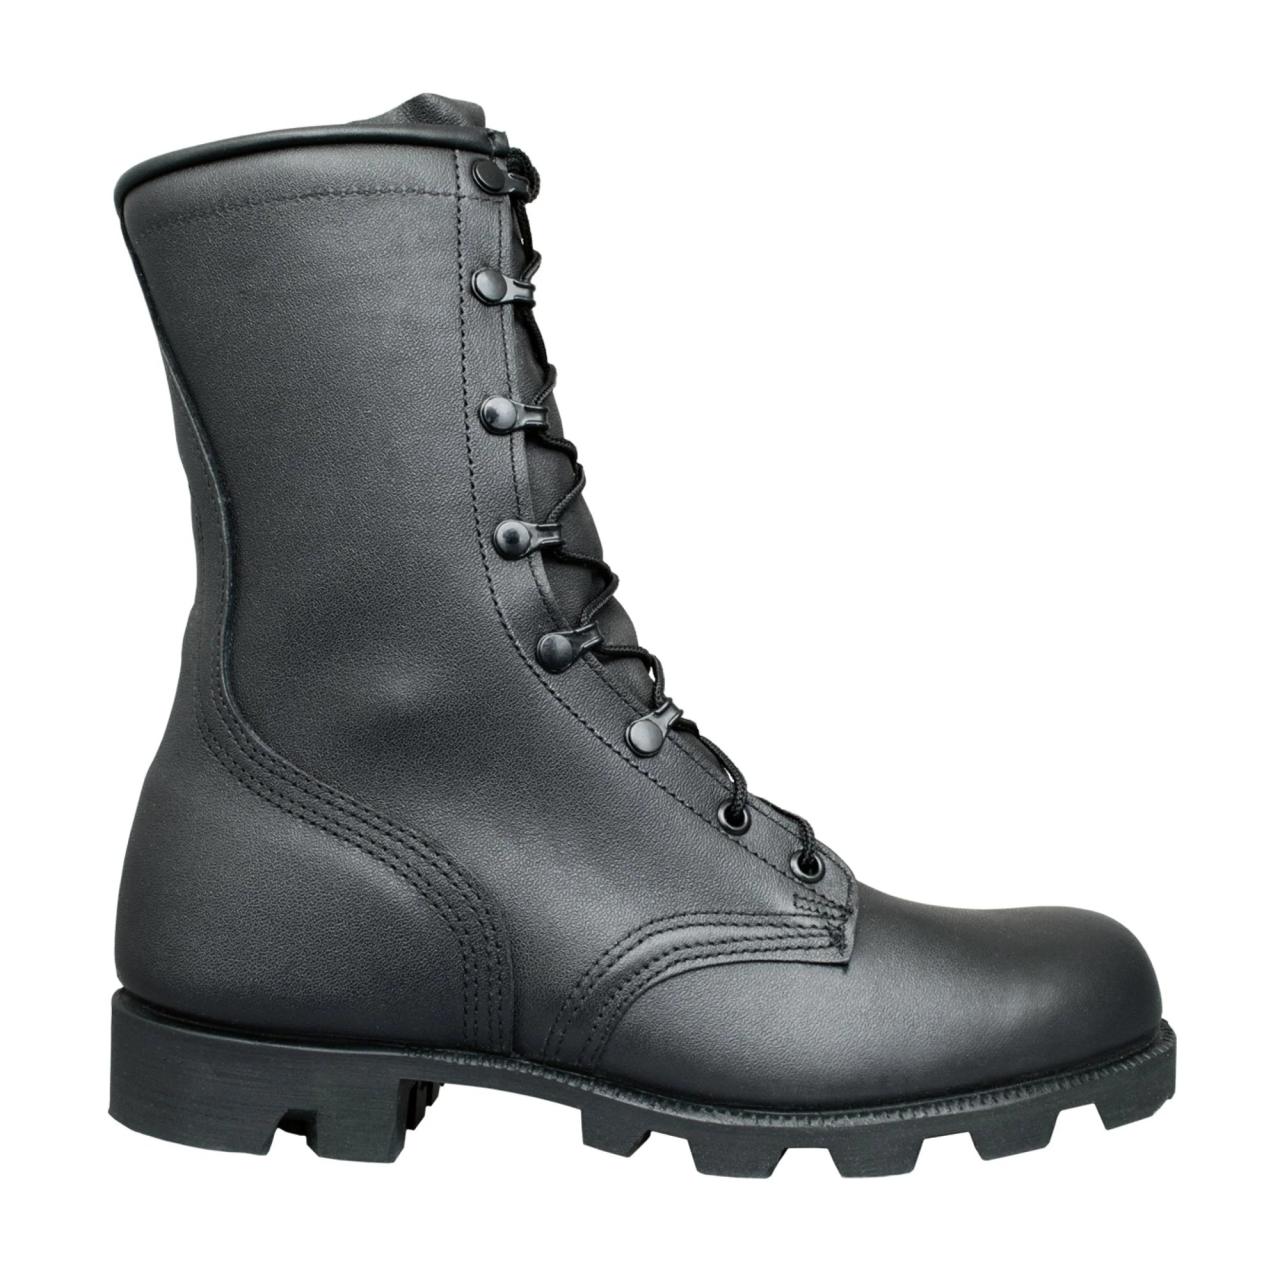 Army combat boot soldiers military test boots designs original issued makers weather side temperate duck safety work wear toe outfitting